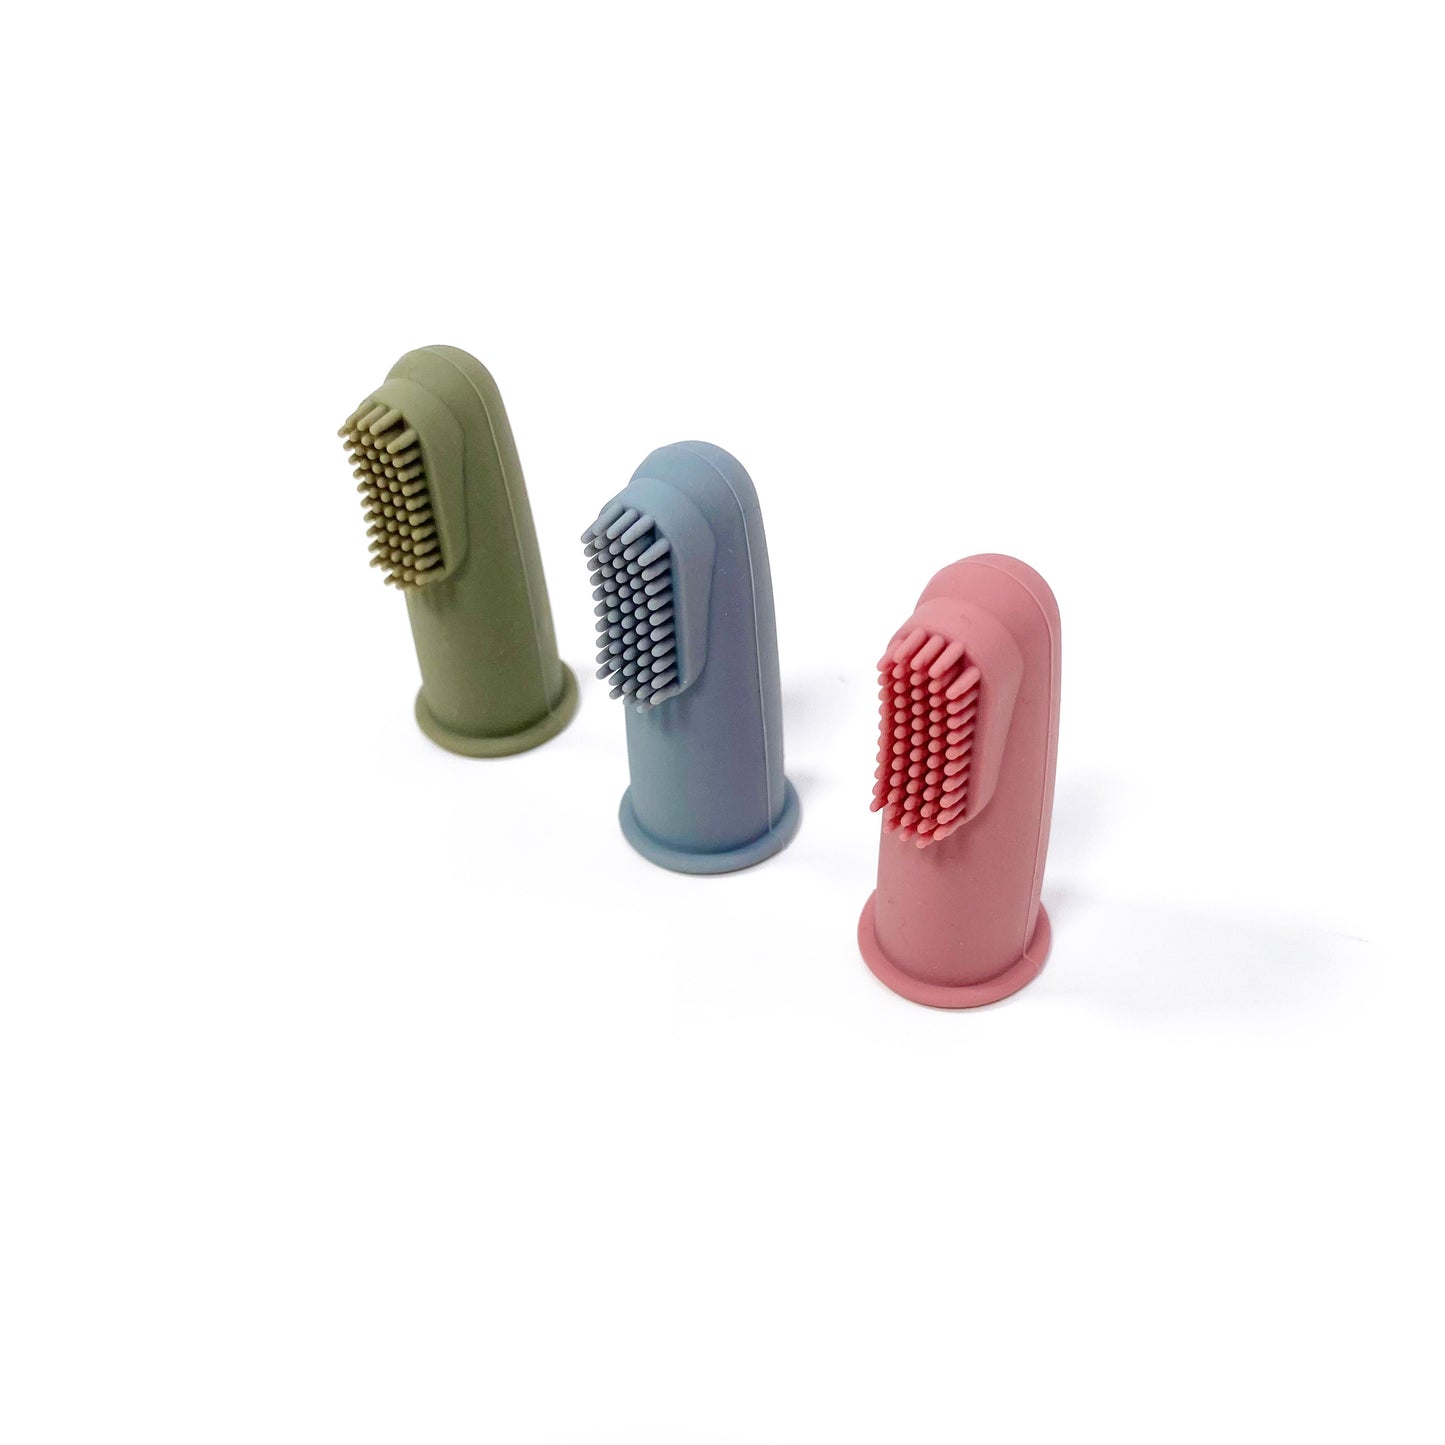 A set of silicone baby toothbrushes in colours khaki green, rose pink and ocean blue. Image shows the toothbrushes standing up, in a diagonal line.